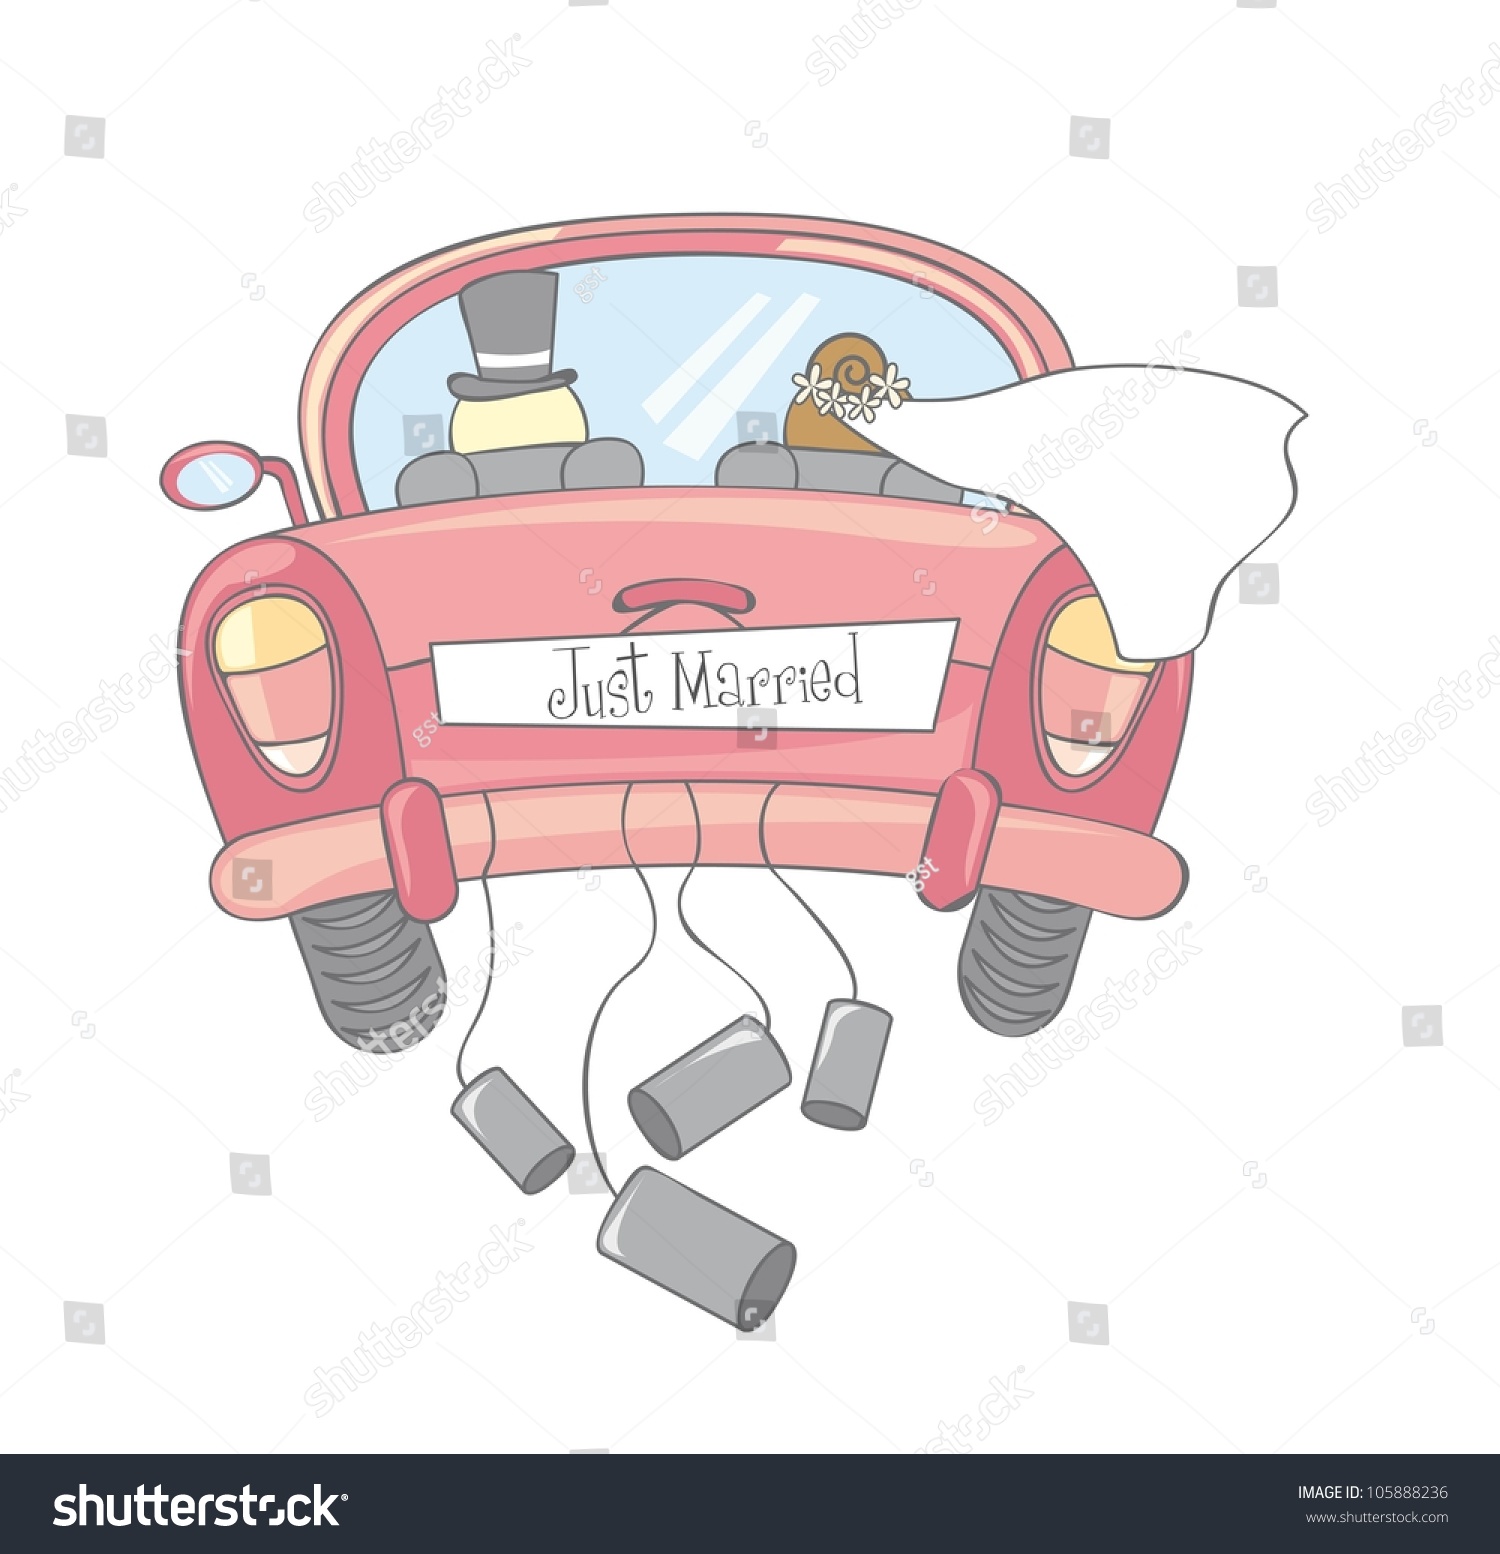 just married car isolated vintage vector illustration